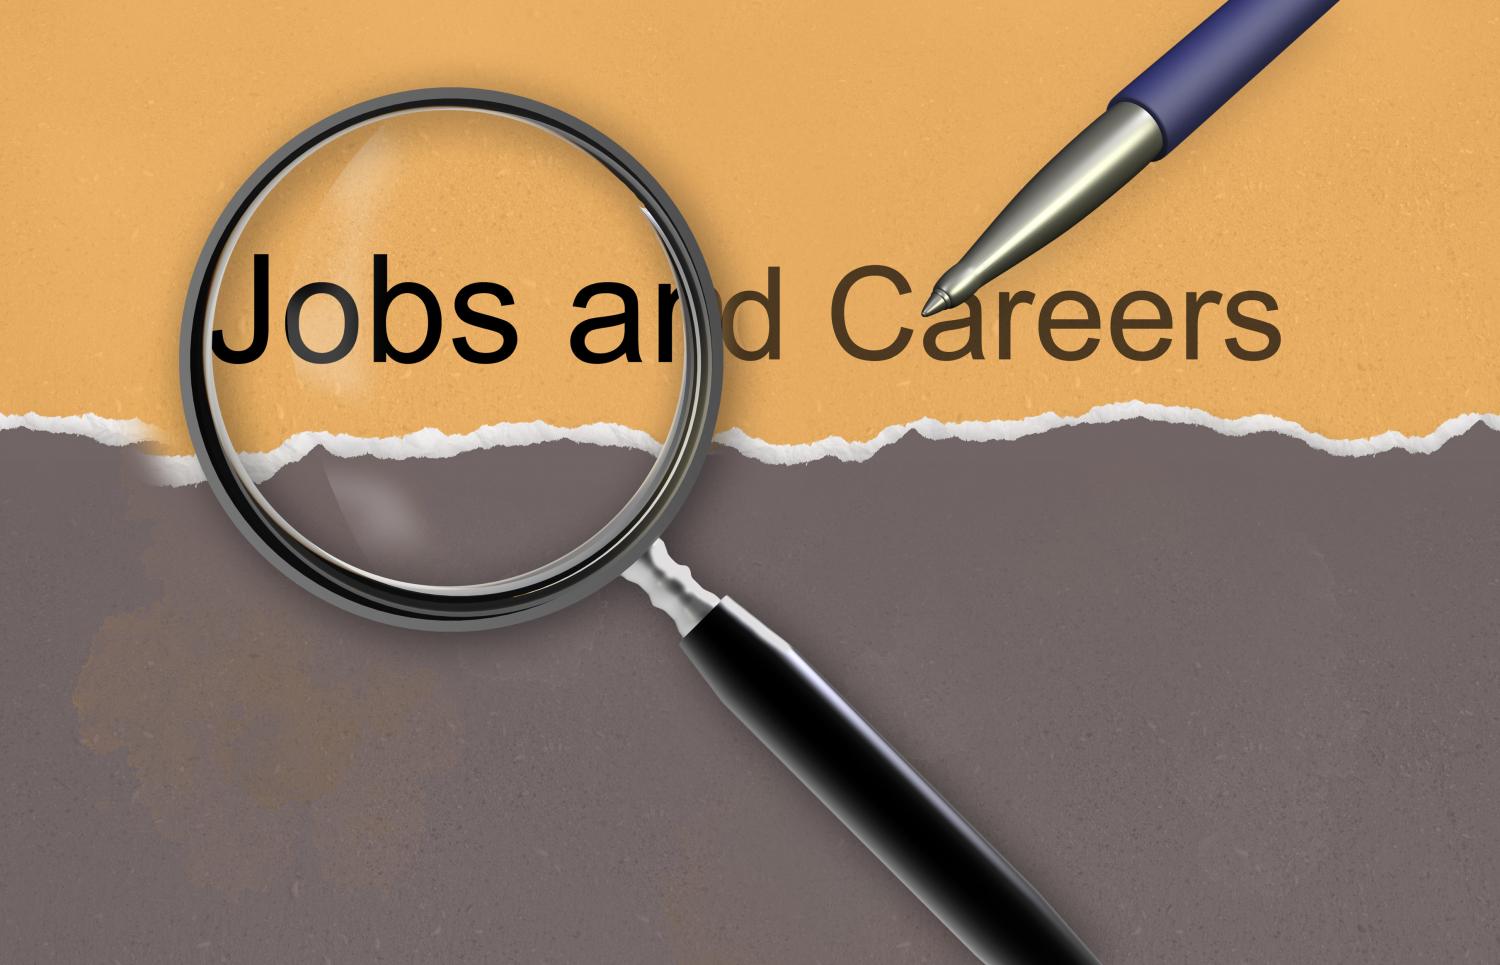 Jobs and Careers image